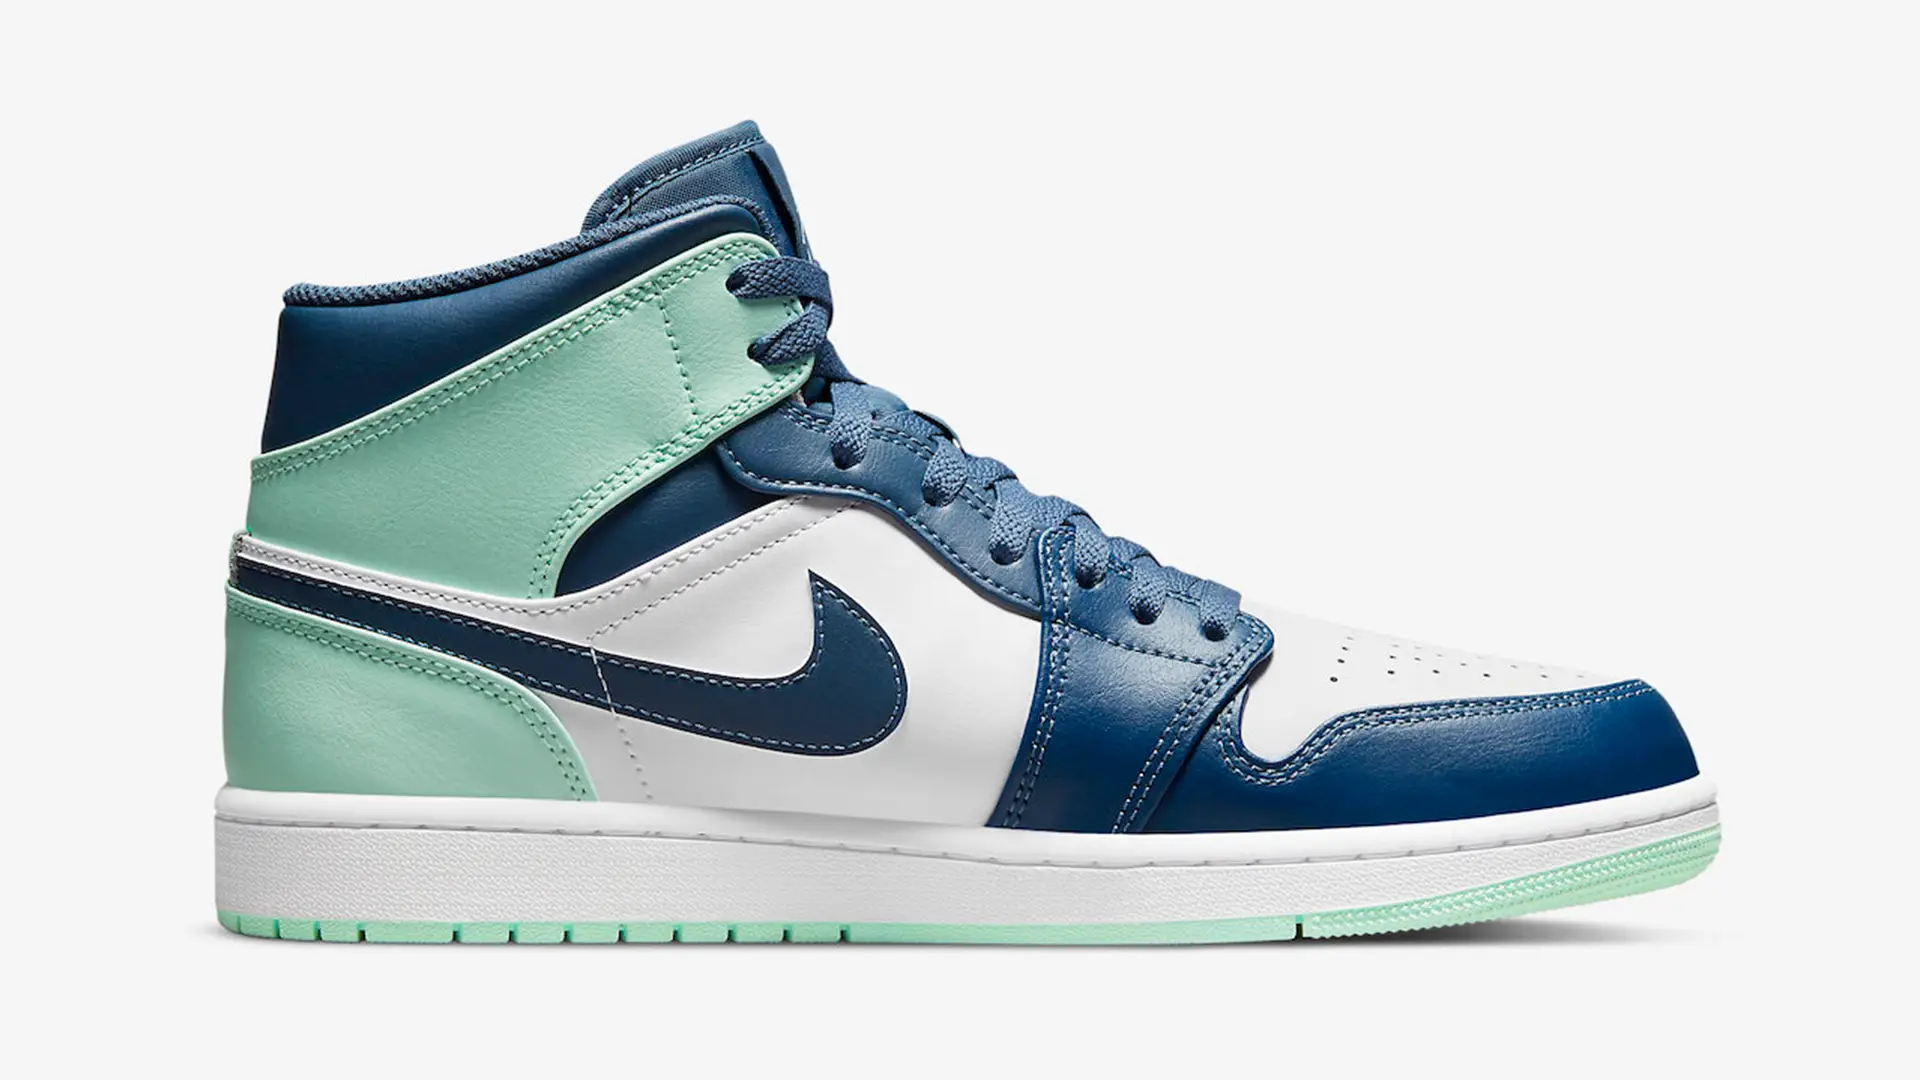 Freshen Up Your Rotation With the Air Jordan 1 Mid 